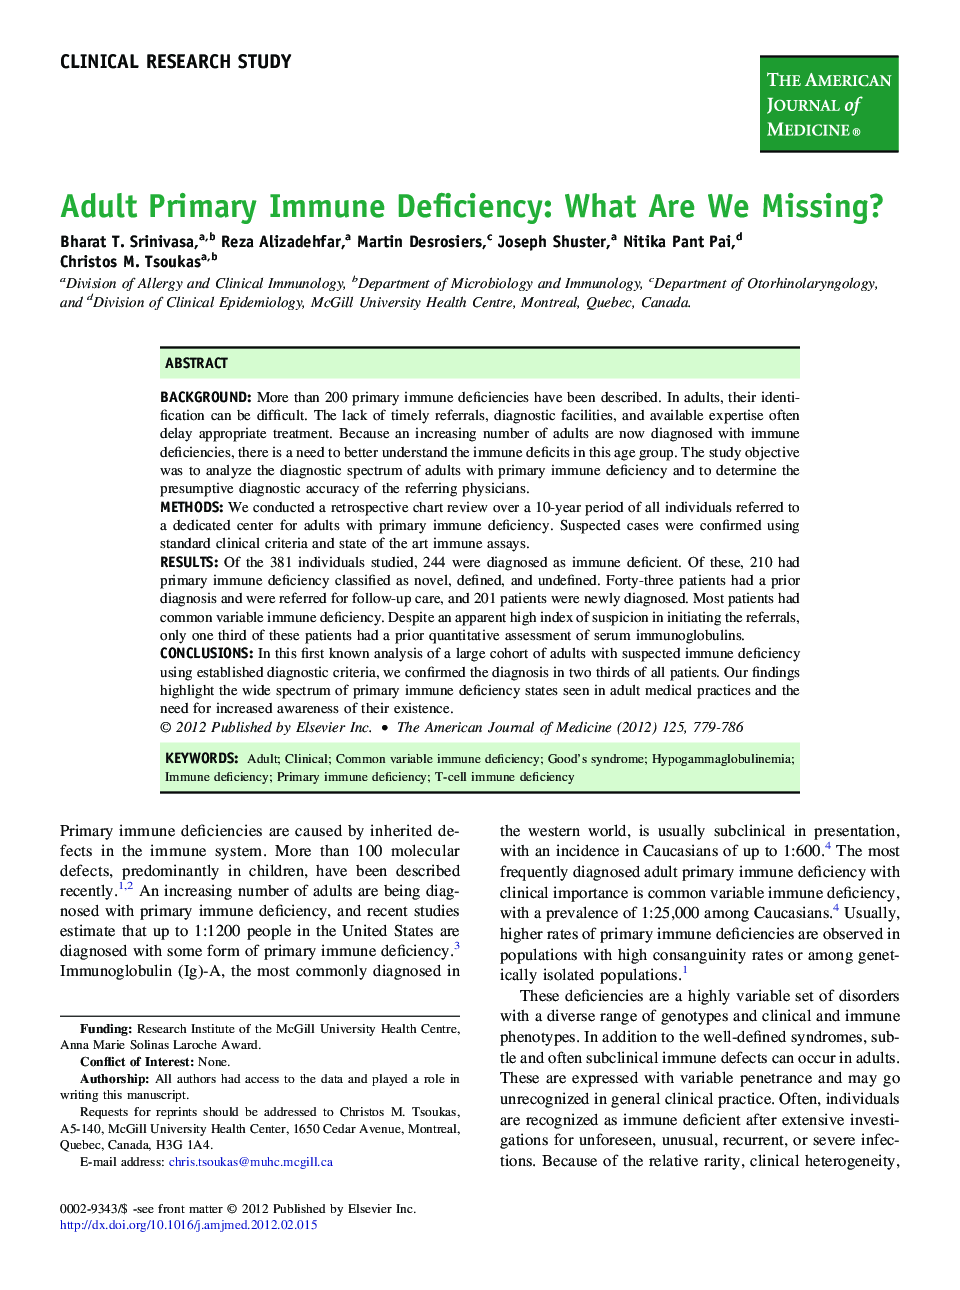 Adult Primary Immune Deficiency: What Are We Missing? 